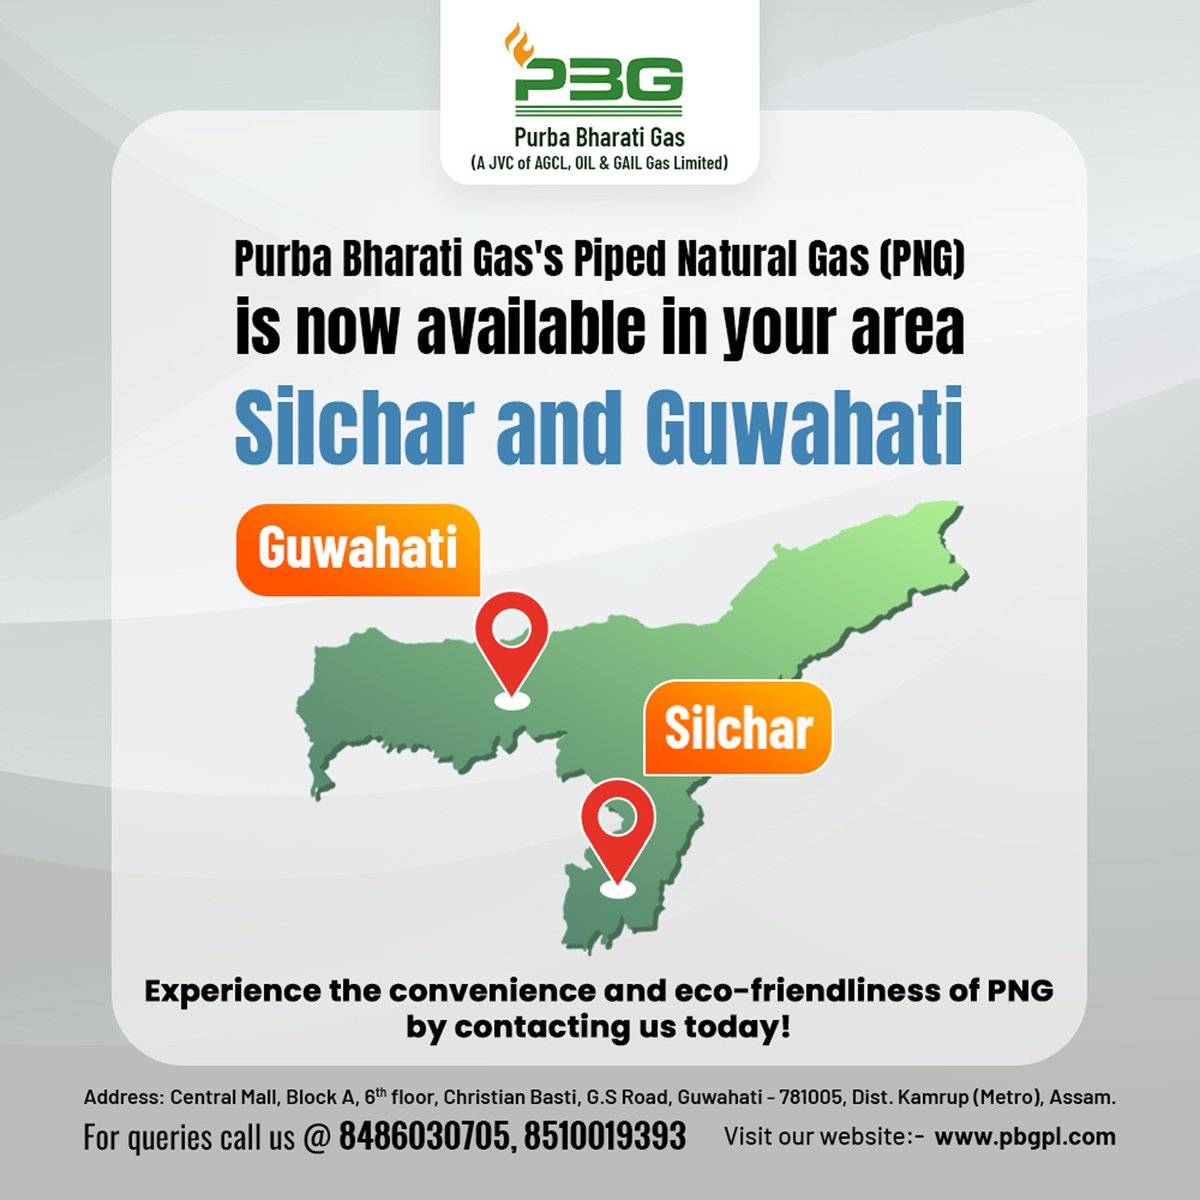 Join the green revolution with Purba Bharati Gas! Enjoy free registration for natural gas till May 31st. Sign up now.
.
.
#pbgpl #PipedNaturalGas #FreeRegistration